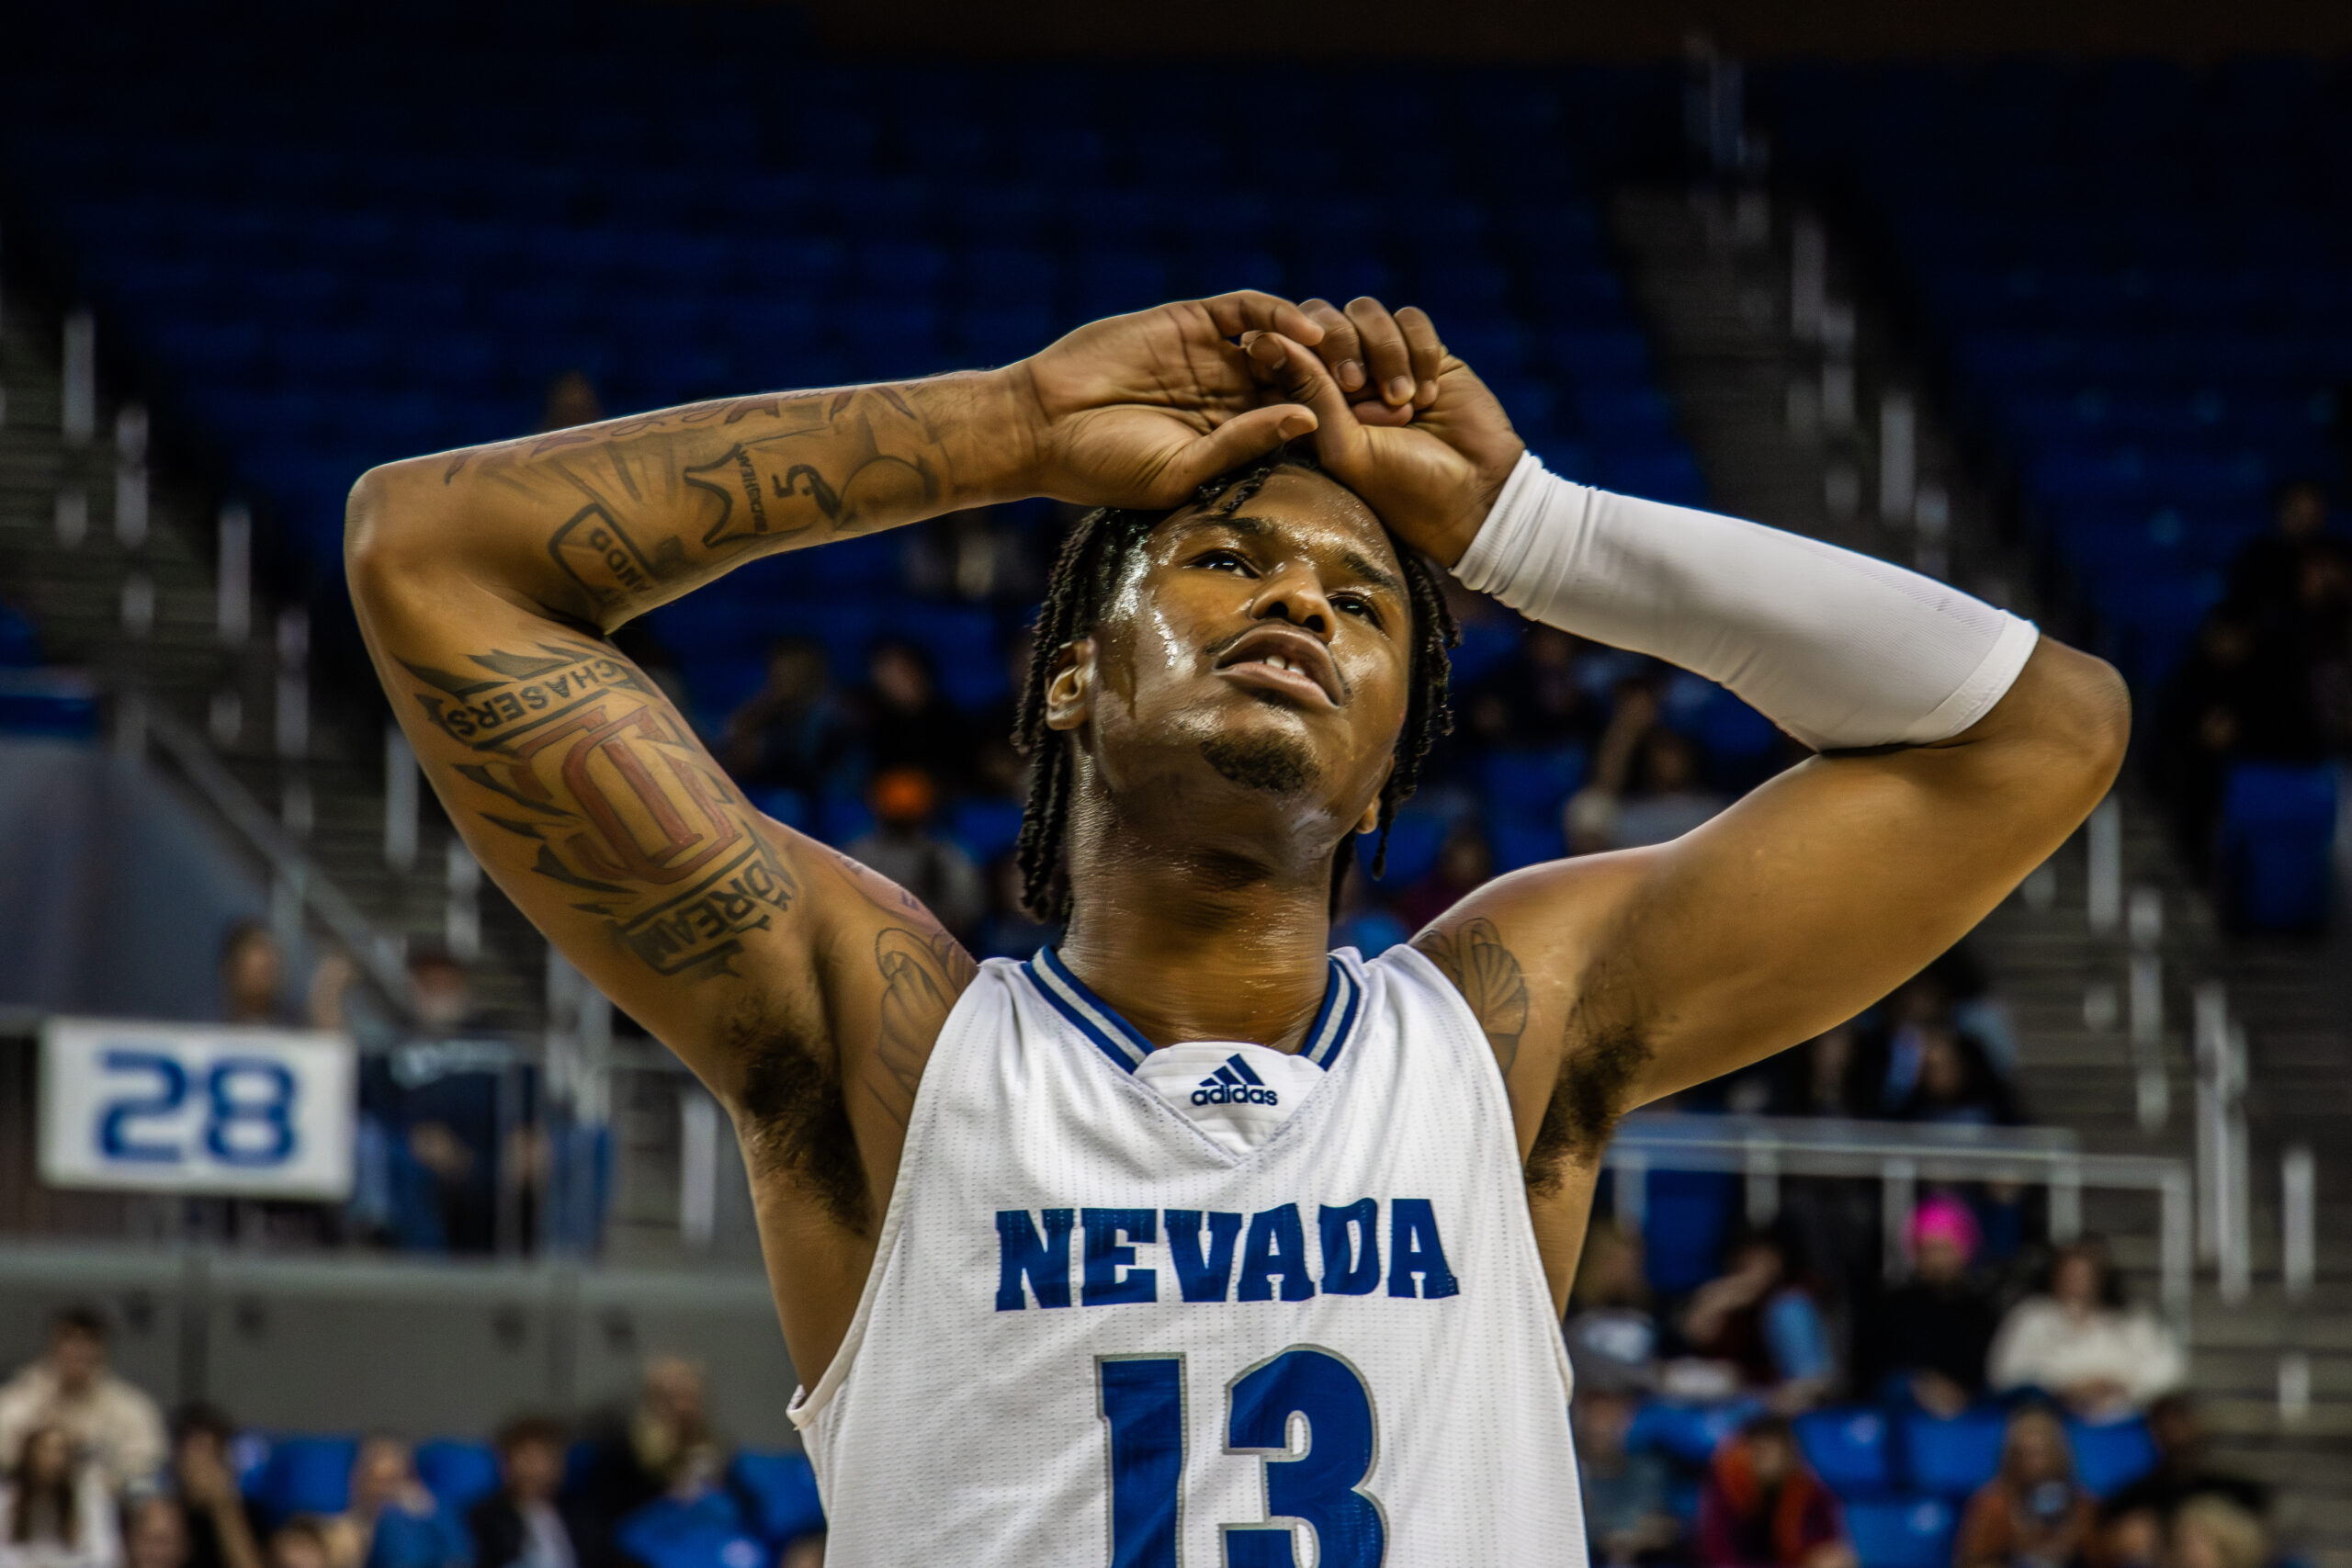 Thrilling overtime victory for the UNR men’s basketball, edges No. 24 SDSU 70-66